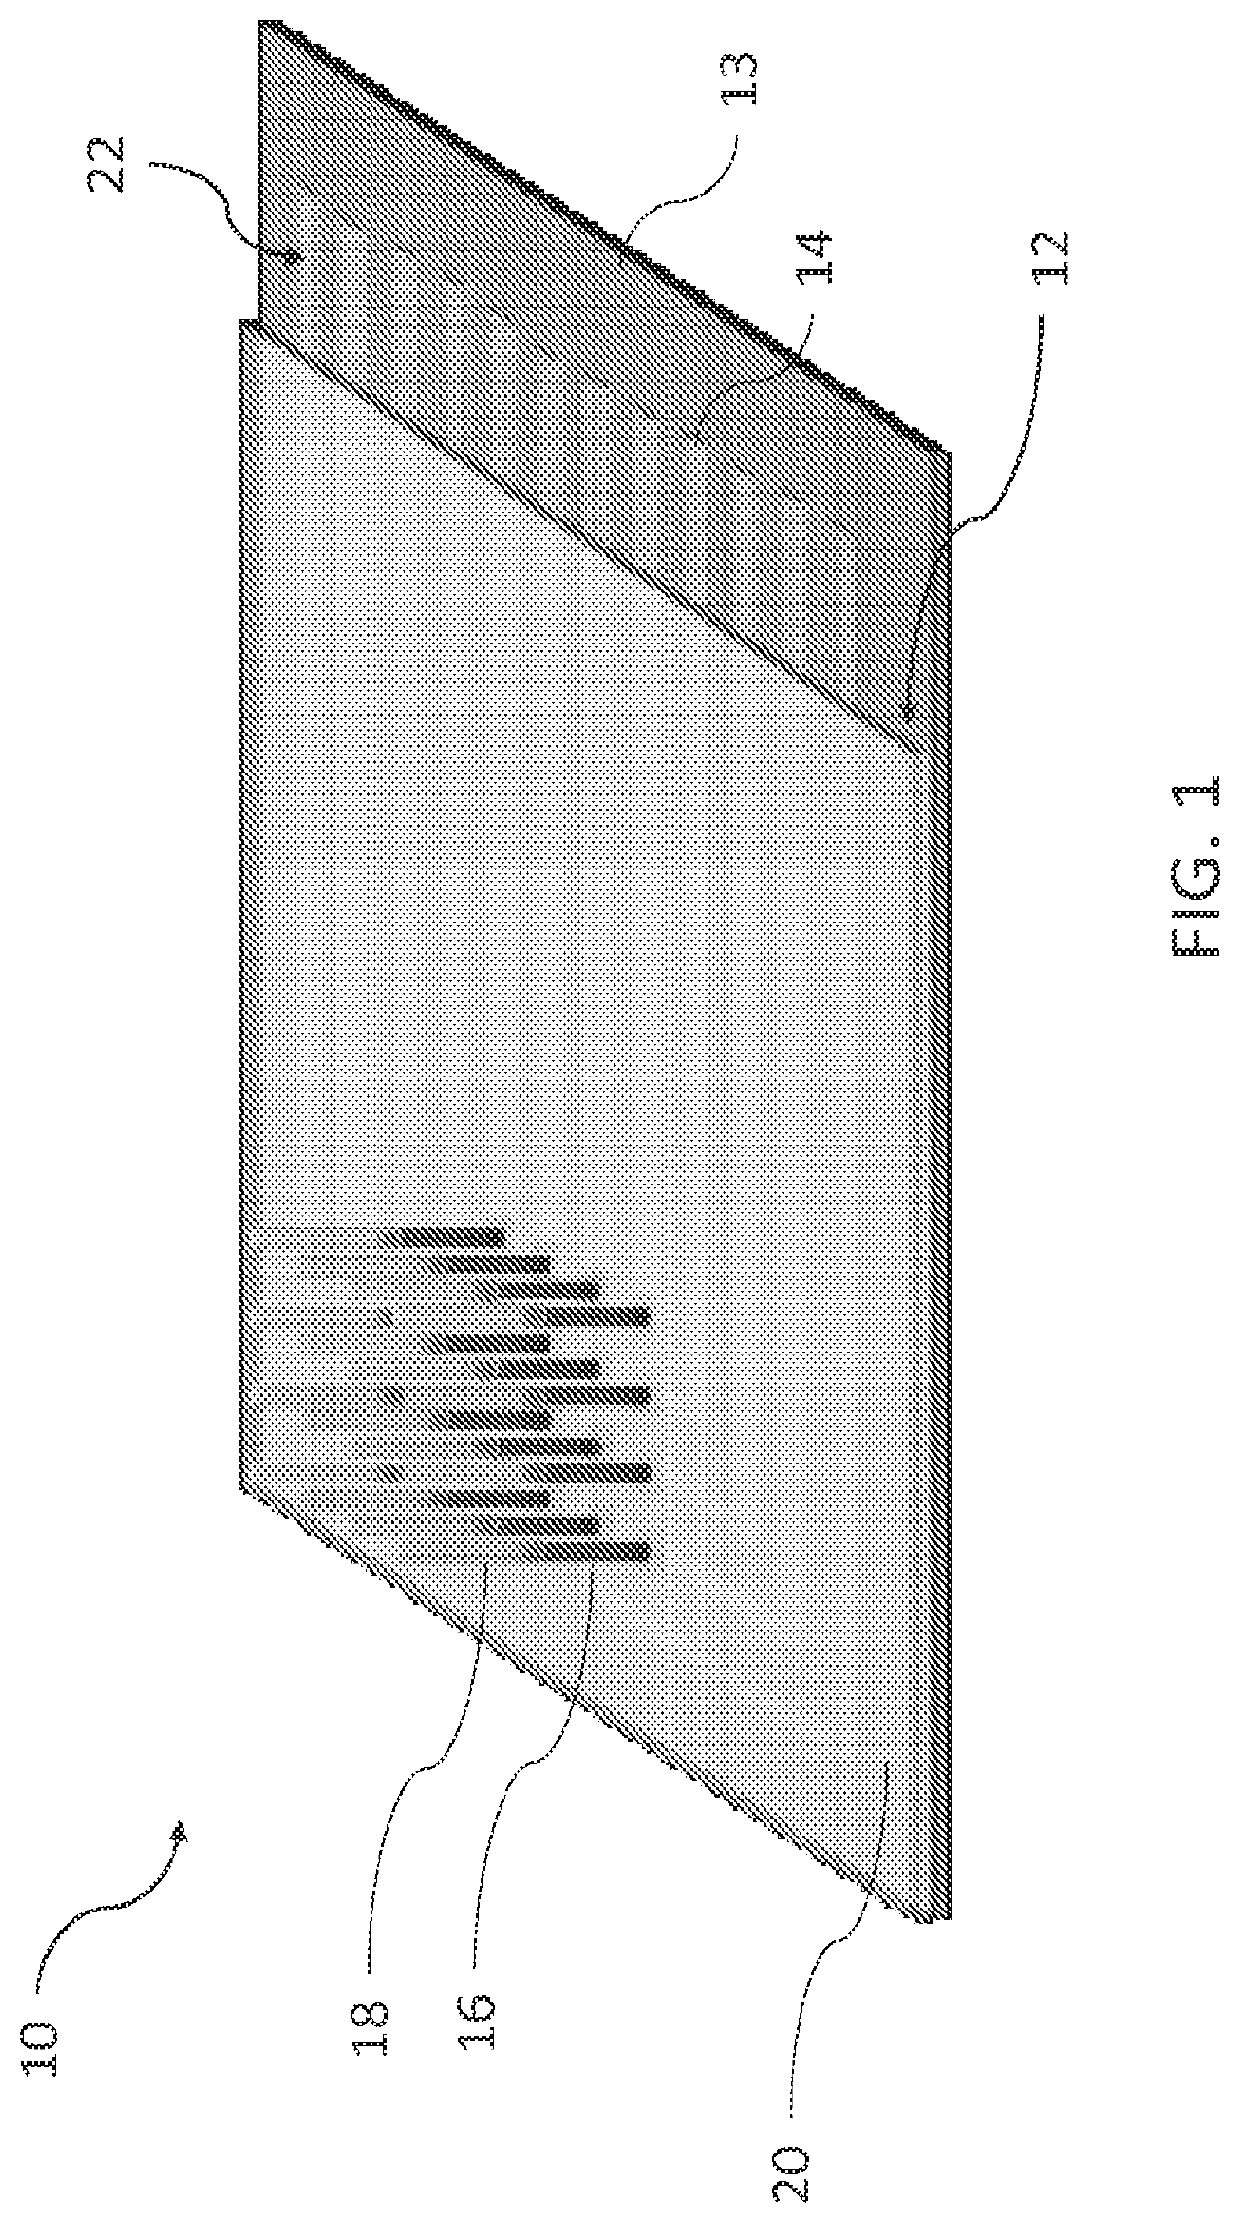 Method for forming a multielectrode conformal penetrating array